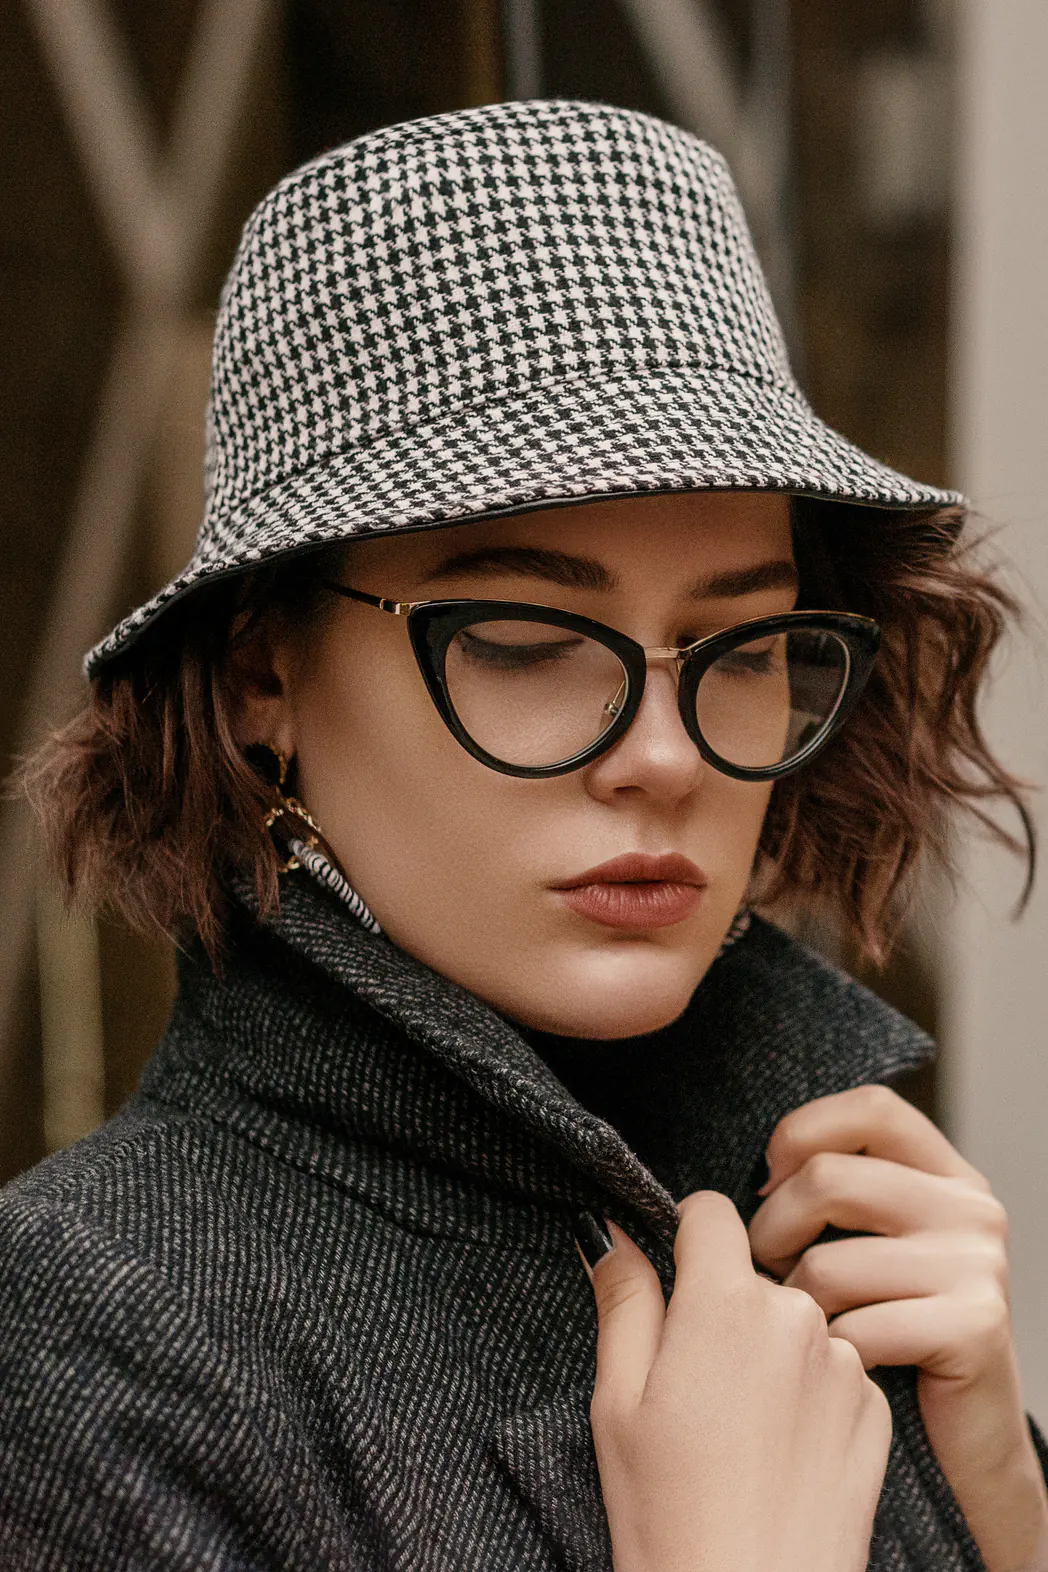 Outdoor close up fashion portrait of young elegant woman wearing trendy checkered bucket hat, stylish cat eye glasses, coat